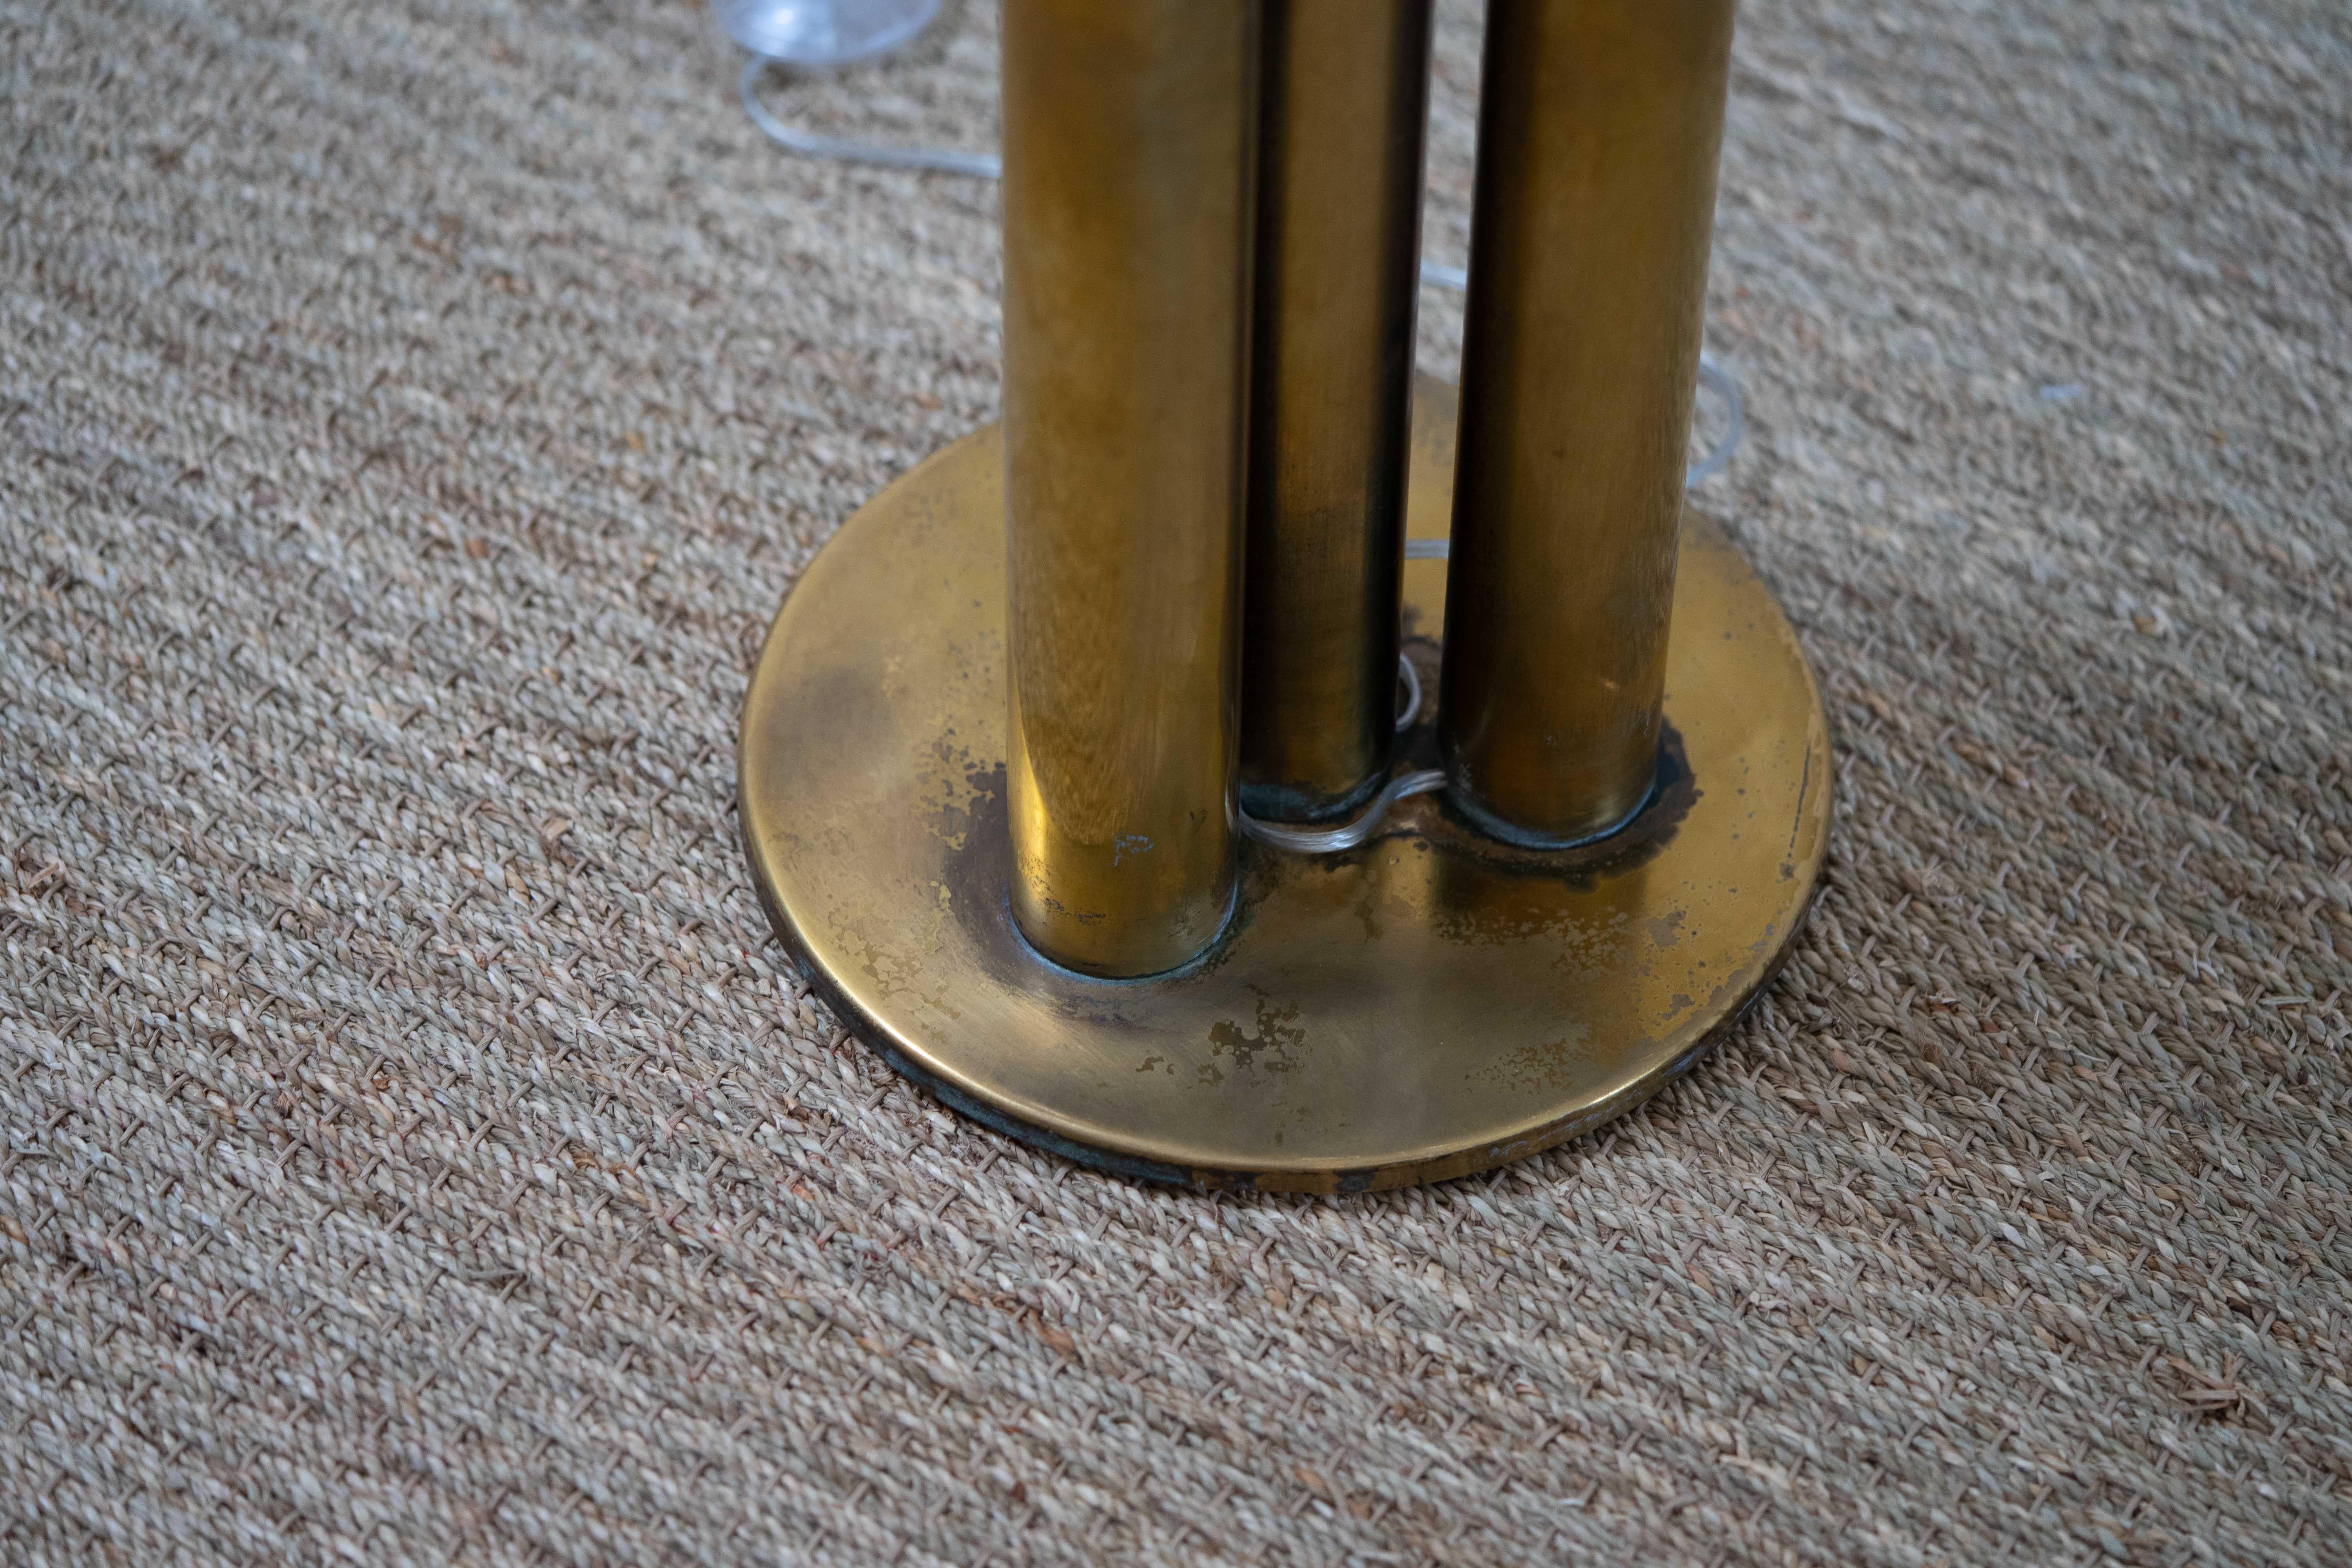 Italian Solid Brass Tube Floor Lamp Designed by R. Fontana, circa 1970 For Sale 4